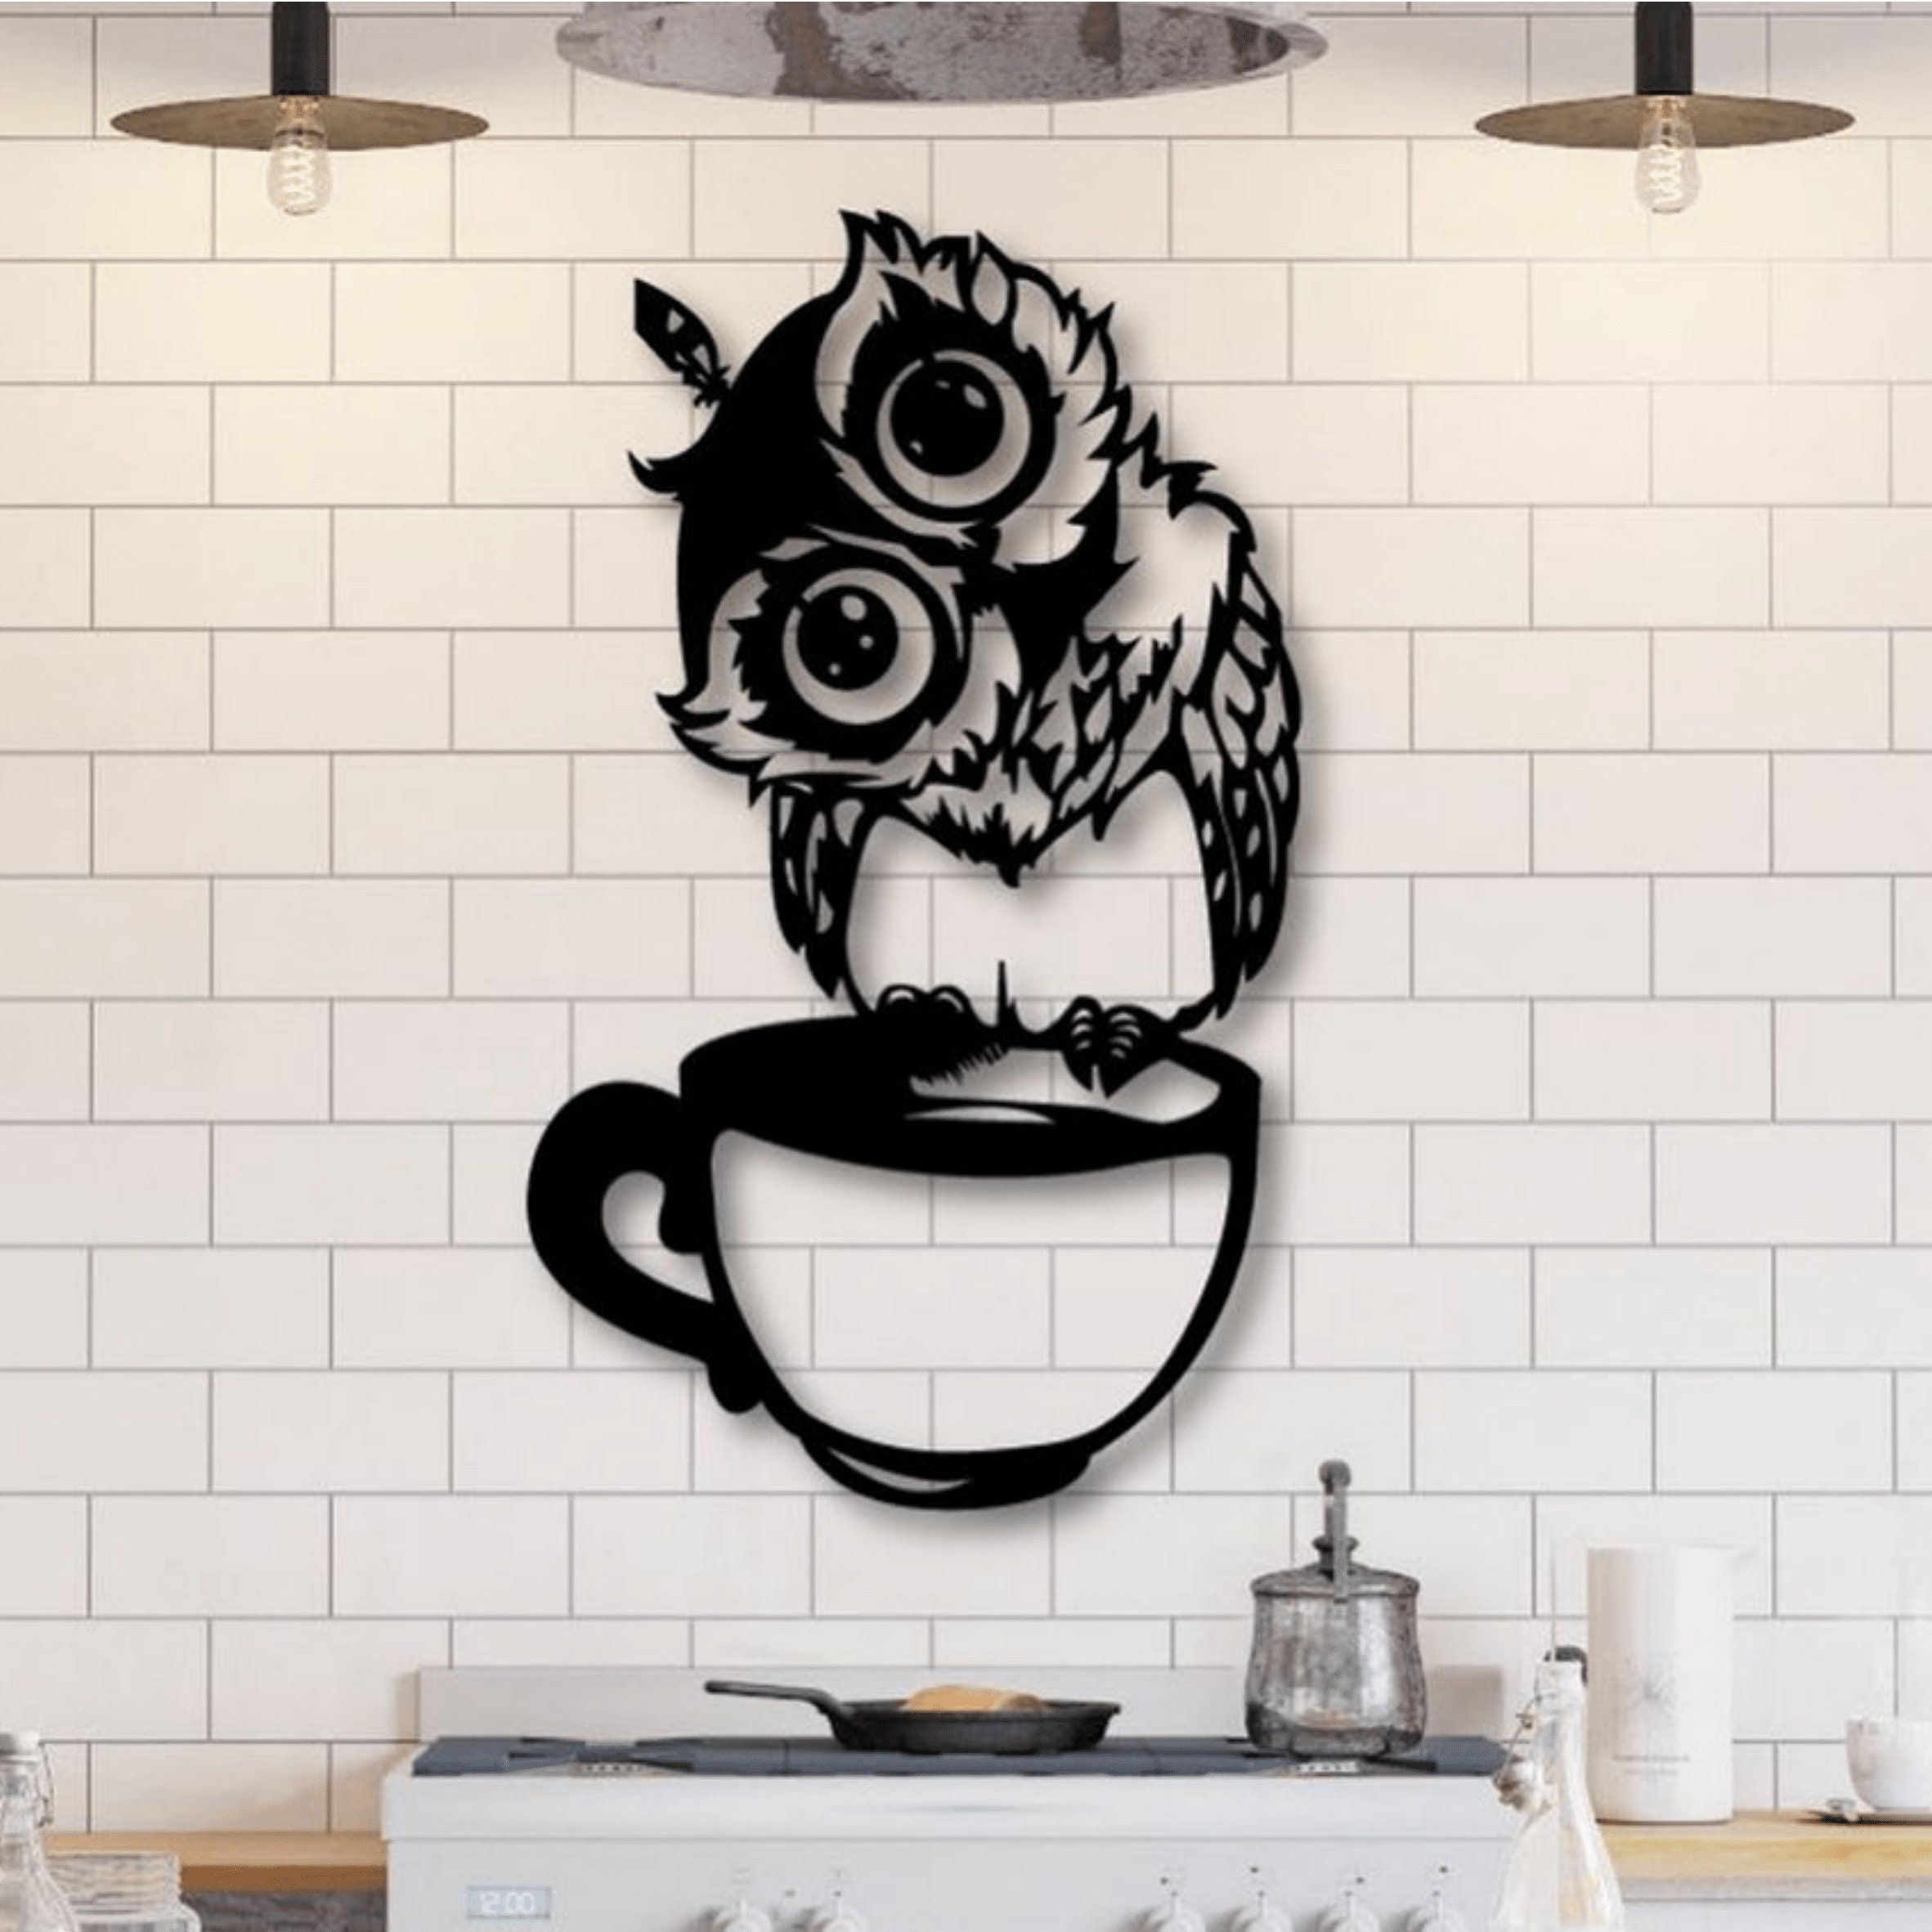 Decoration Murale Metal , Chouette sur Tasse, Wall Art, Made in France